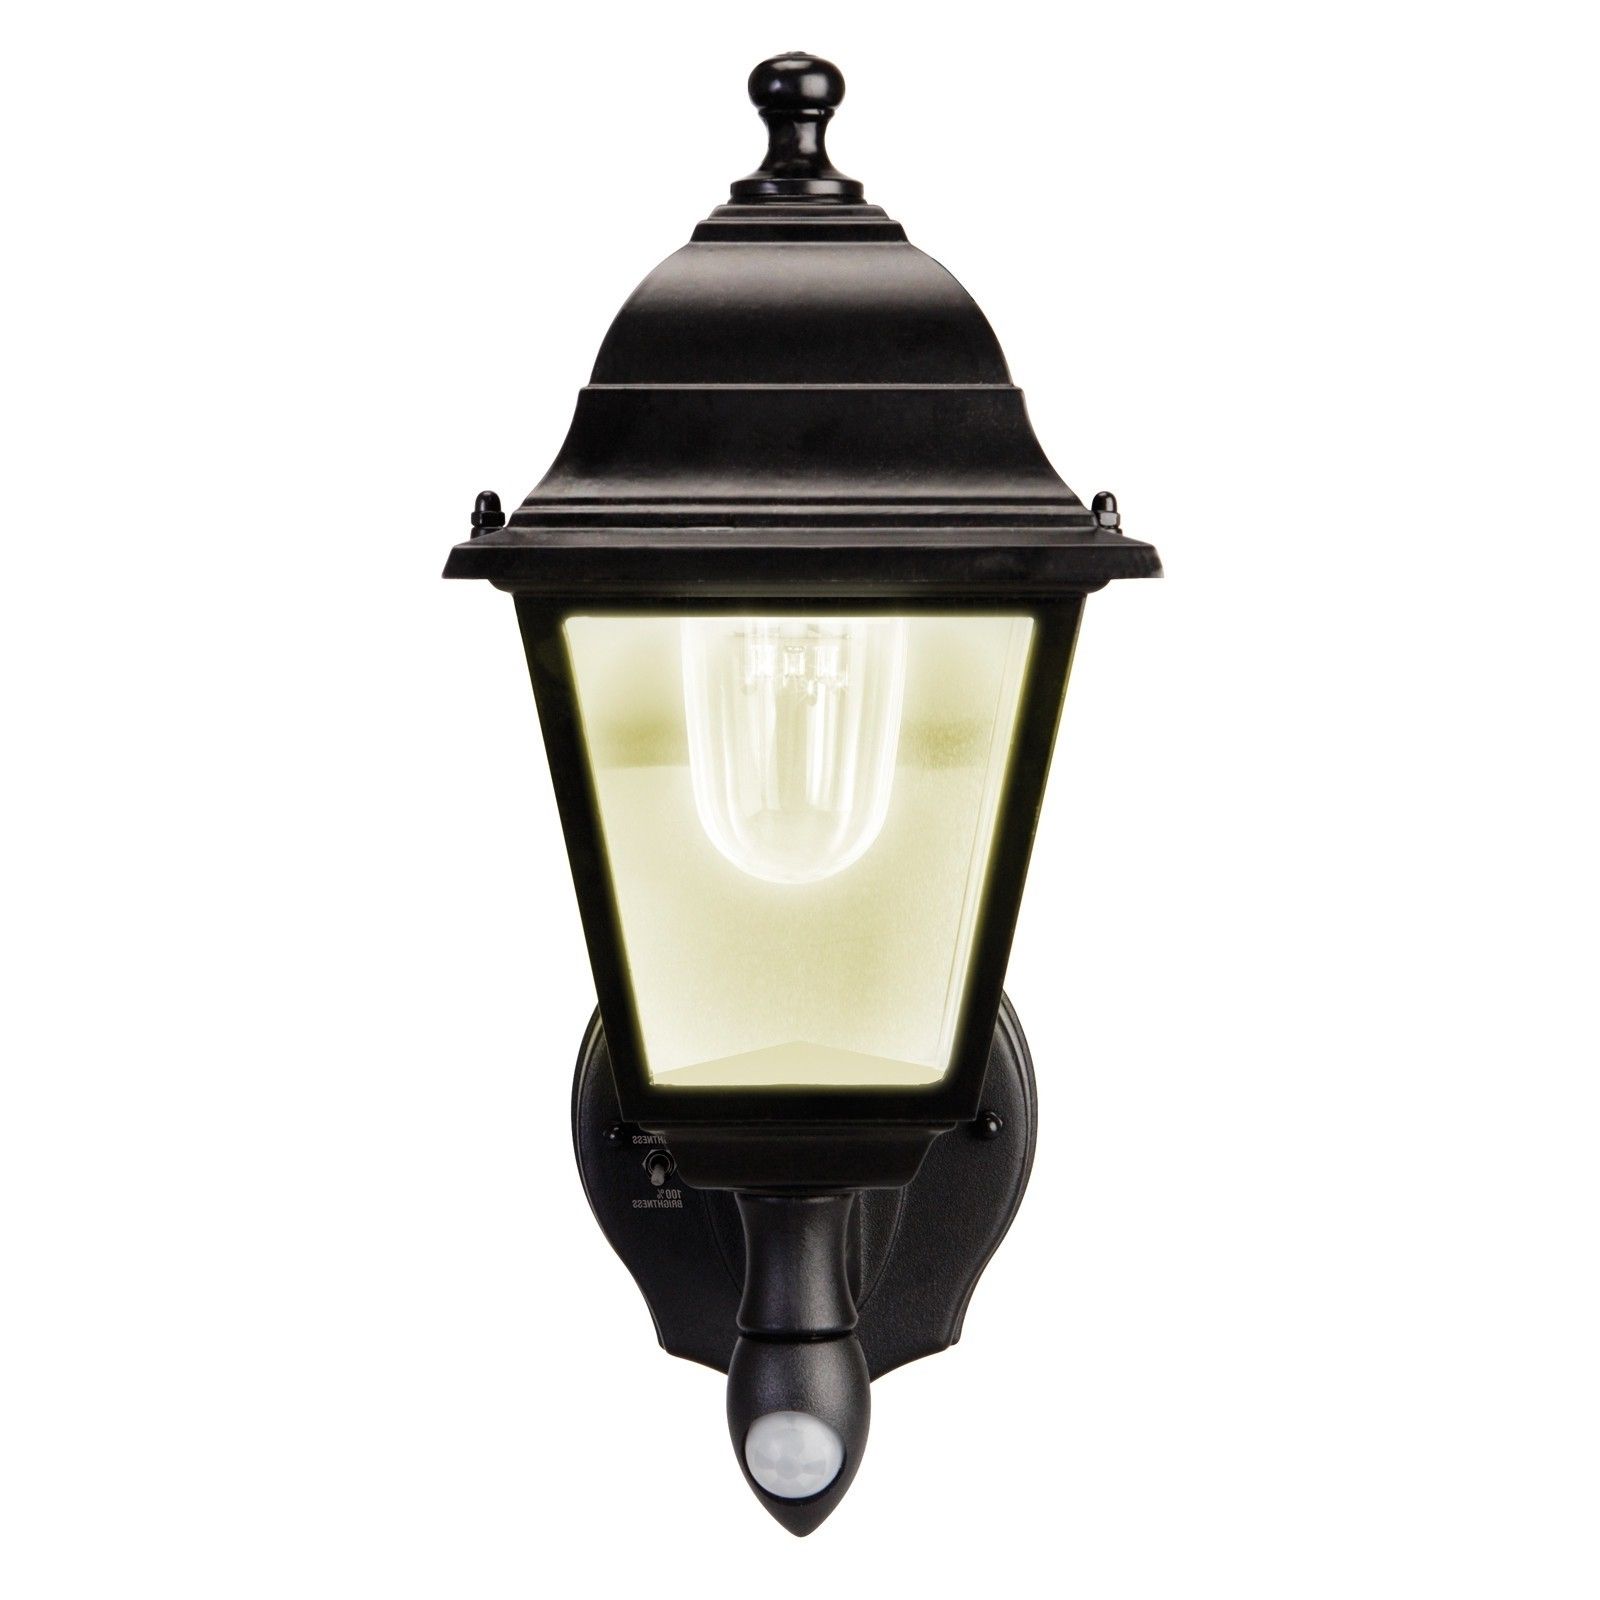 Entertainment : Home Accecories Exterior Sconces Promotion Shop For With Outdoor Wall Lighting At Houzz (View 13 of 15)